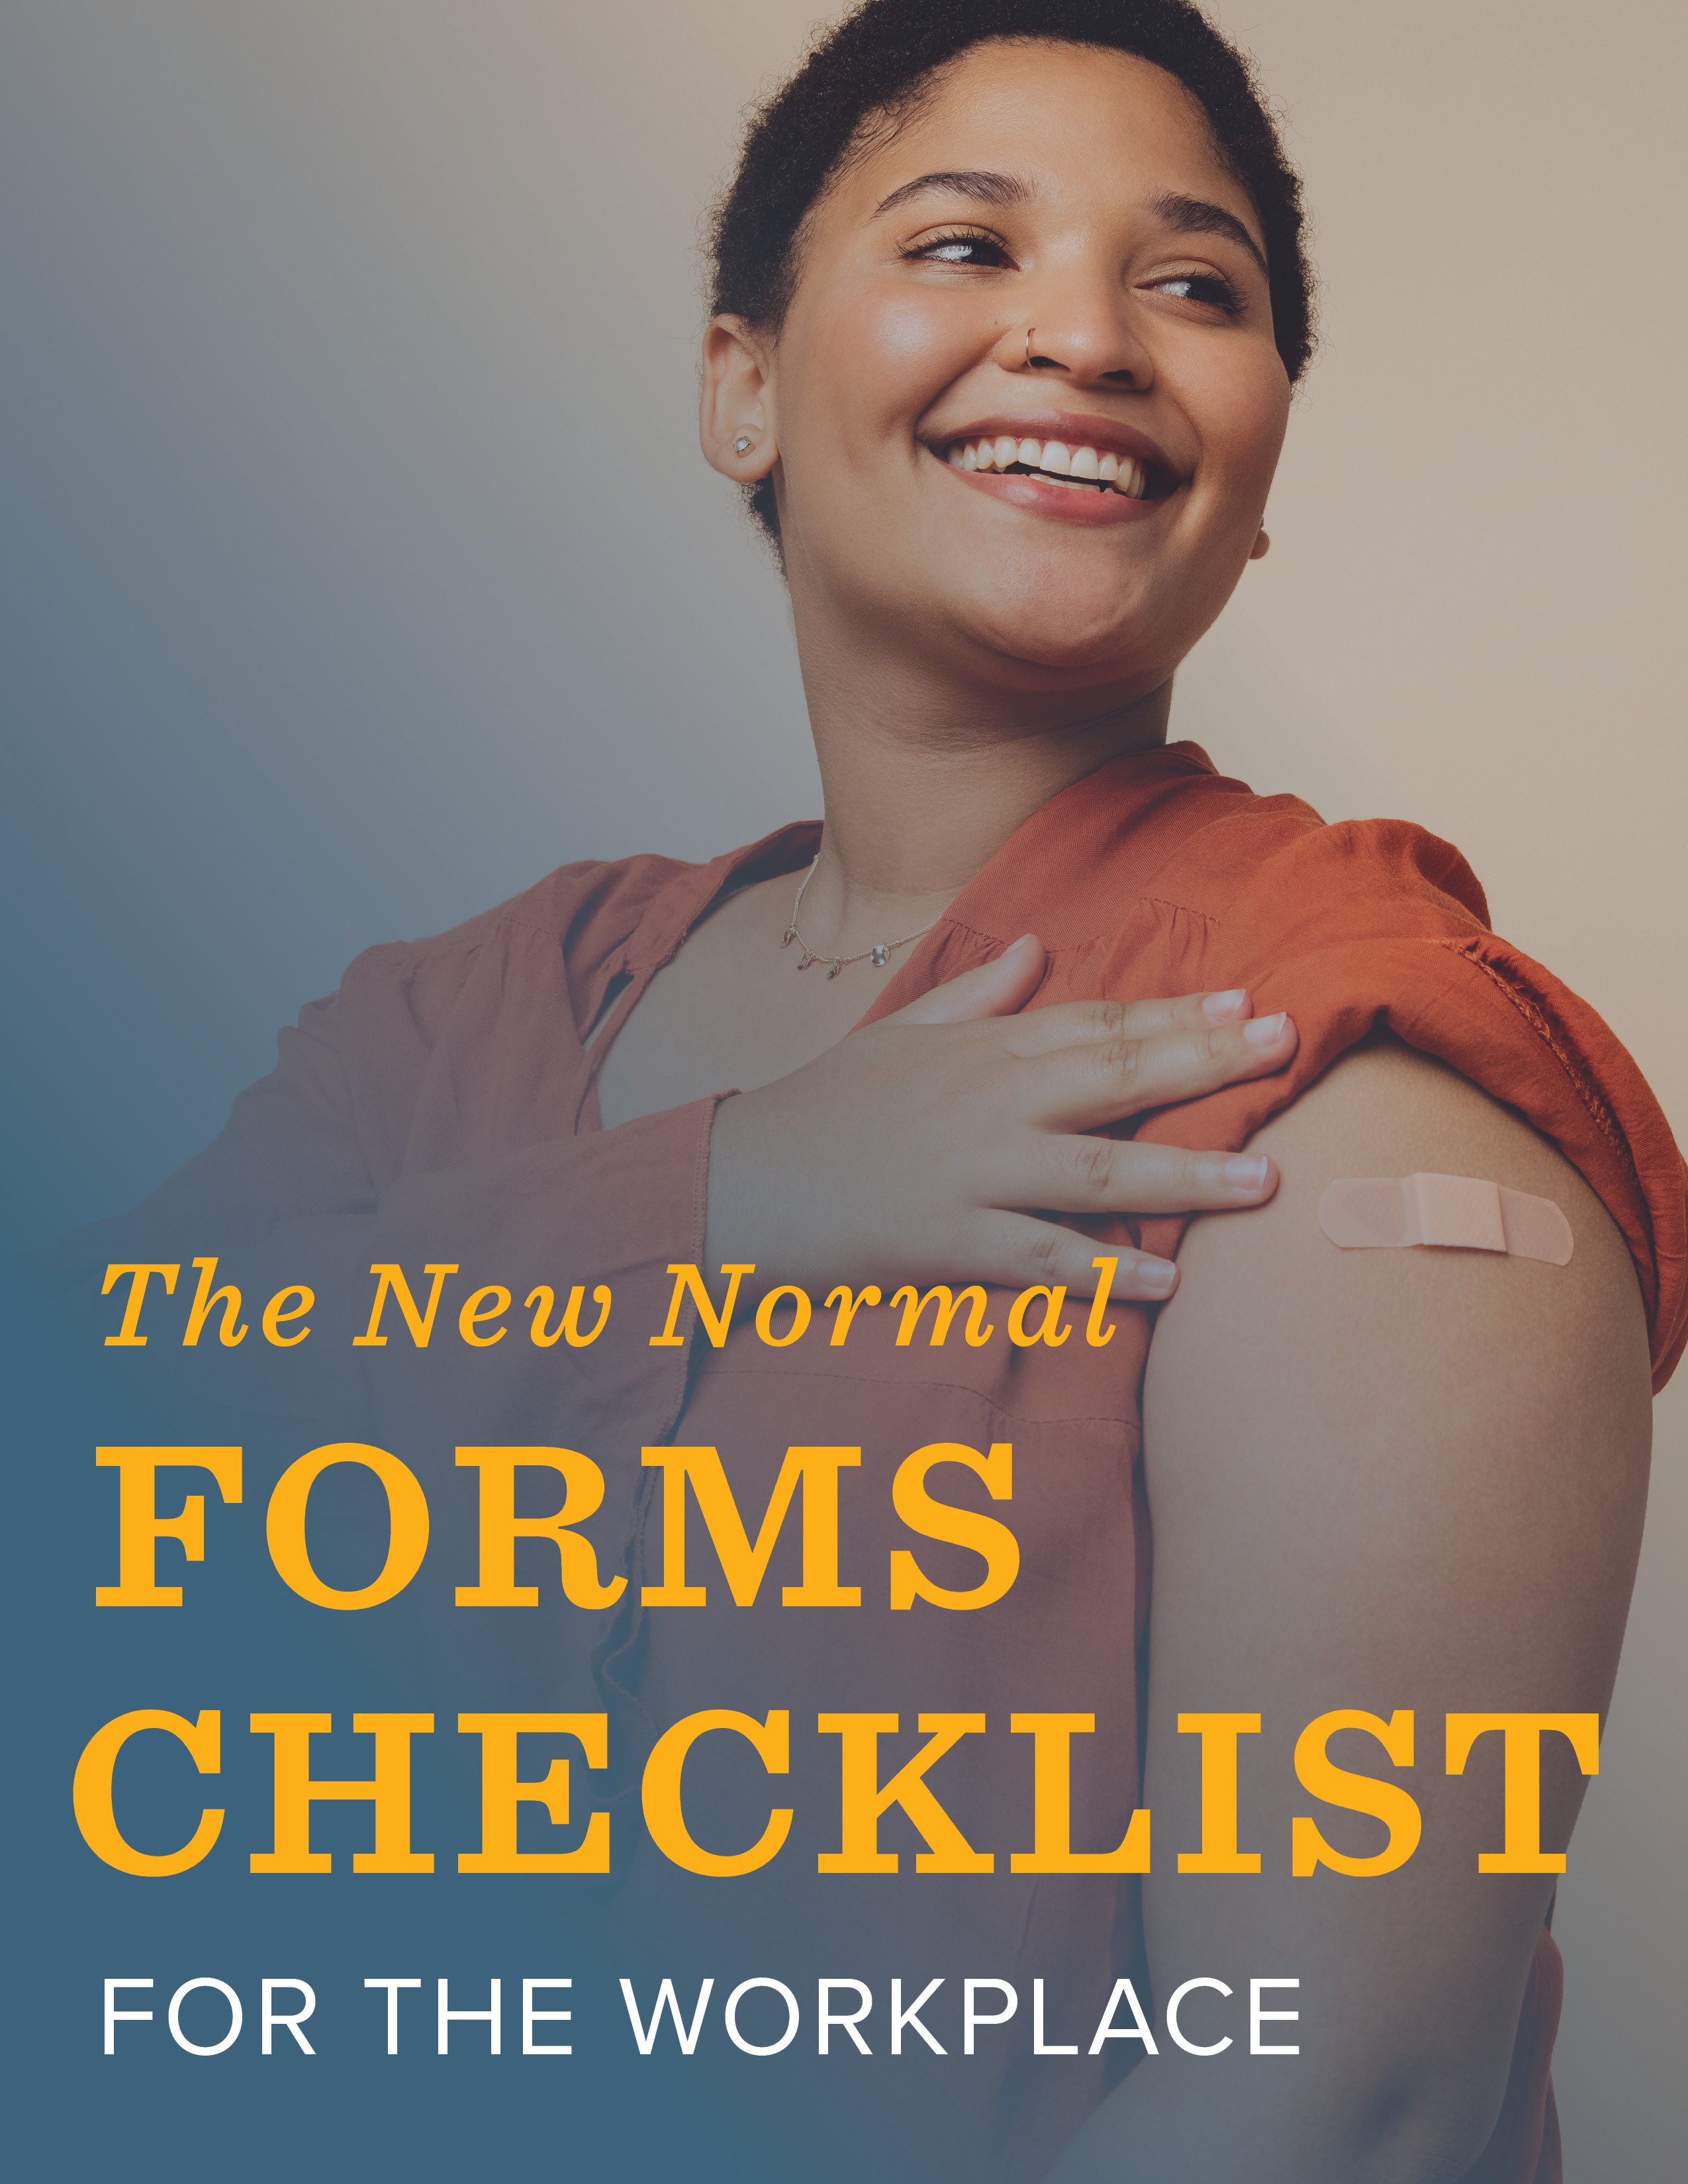 The New Normal Forms Checklist for the Workplace